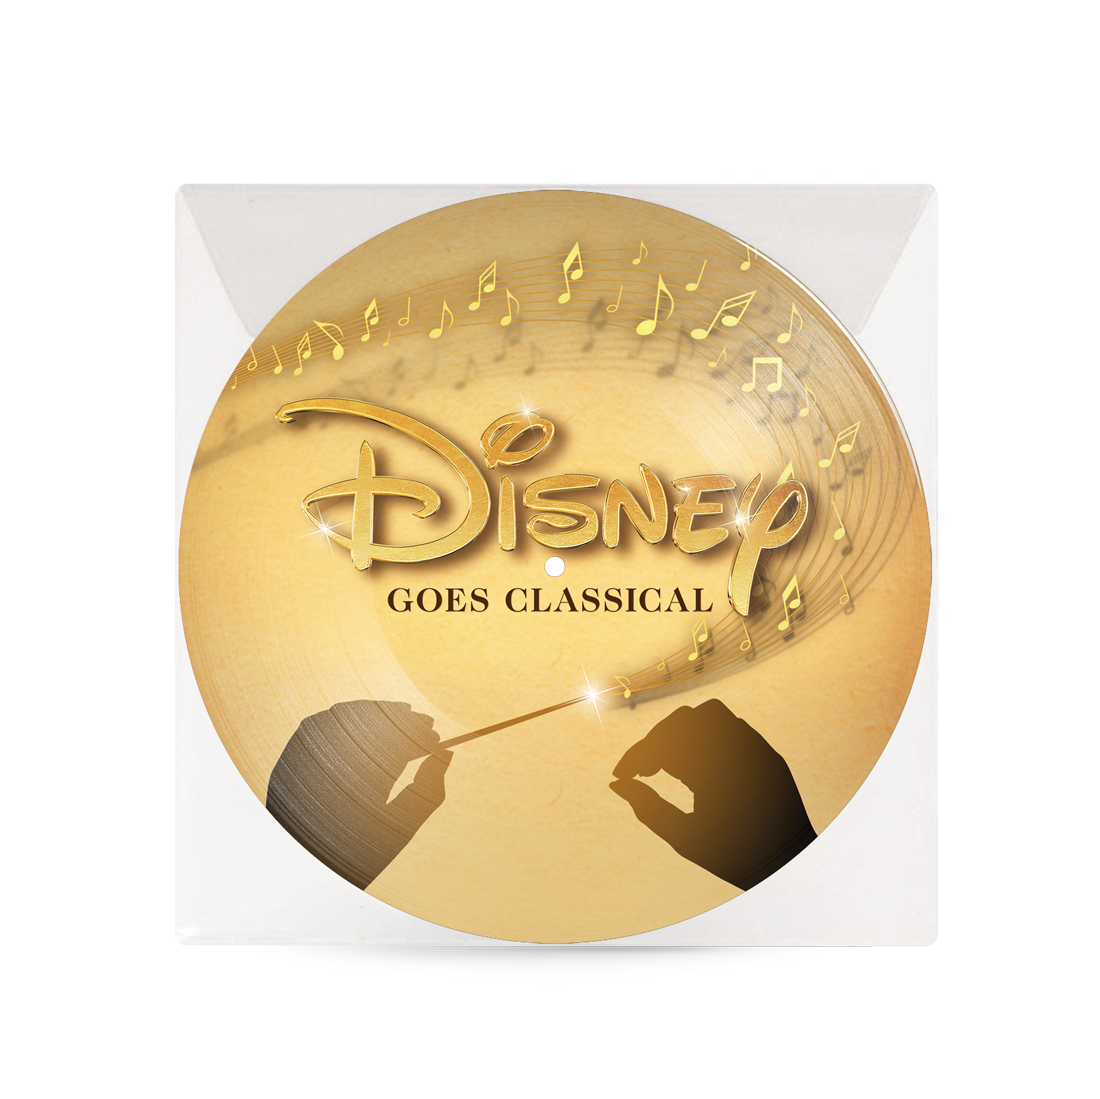 Royal Philharmonic Orchestra - Disney Goes Classical: Limited Edition Vinyl Picture Disc LP